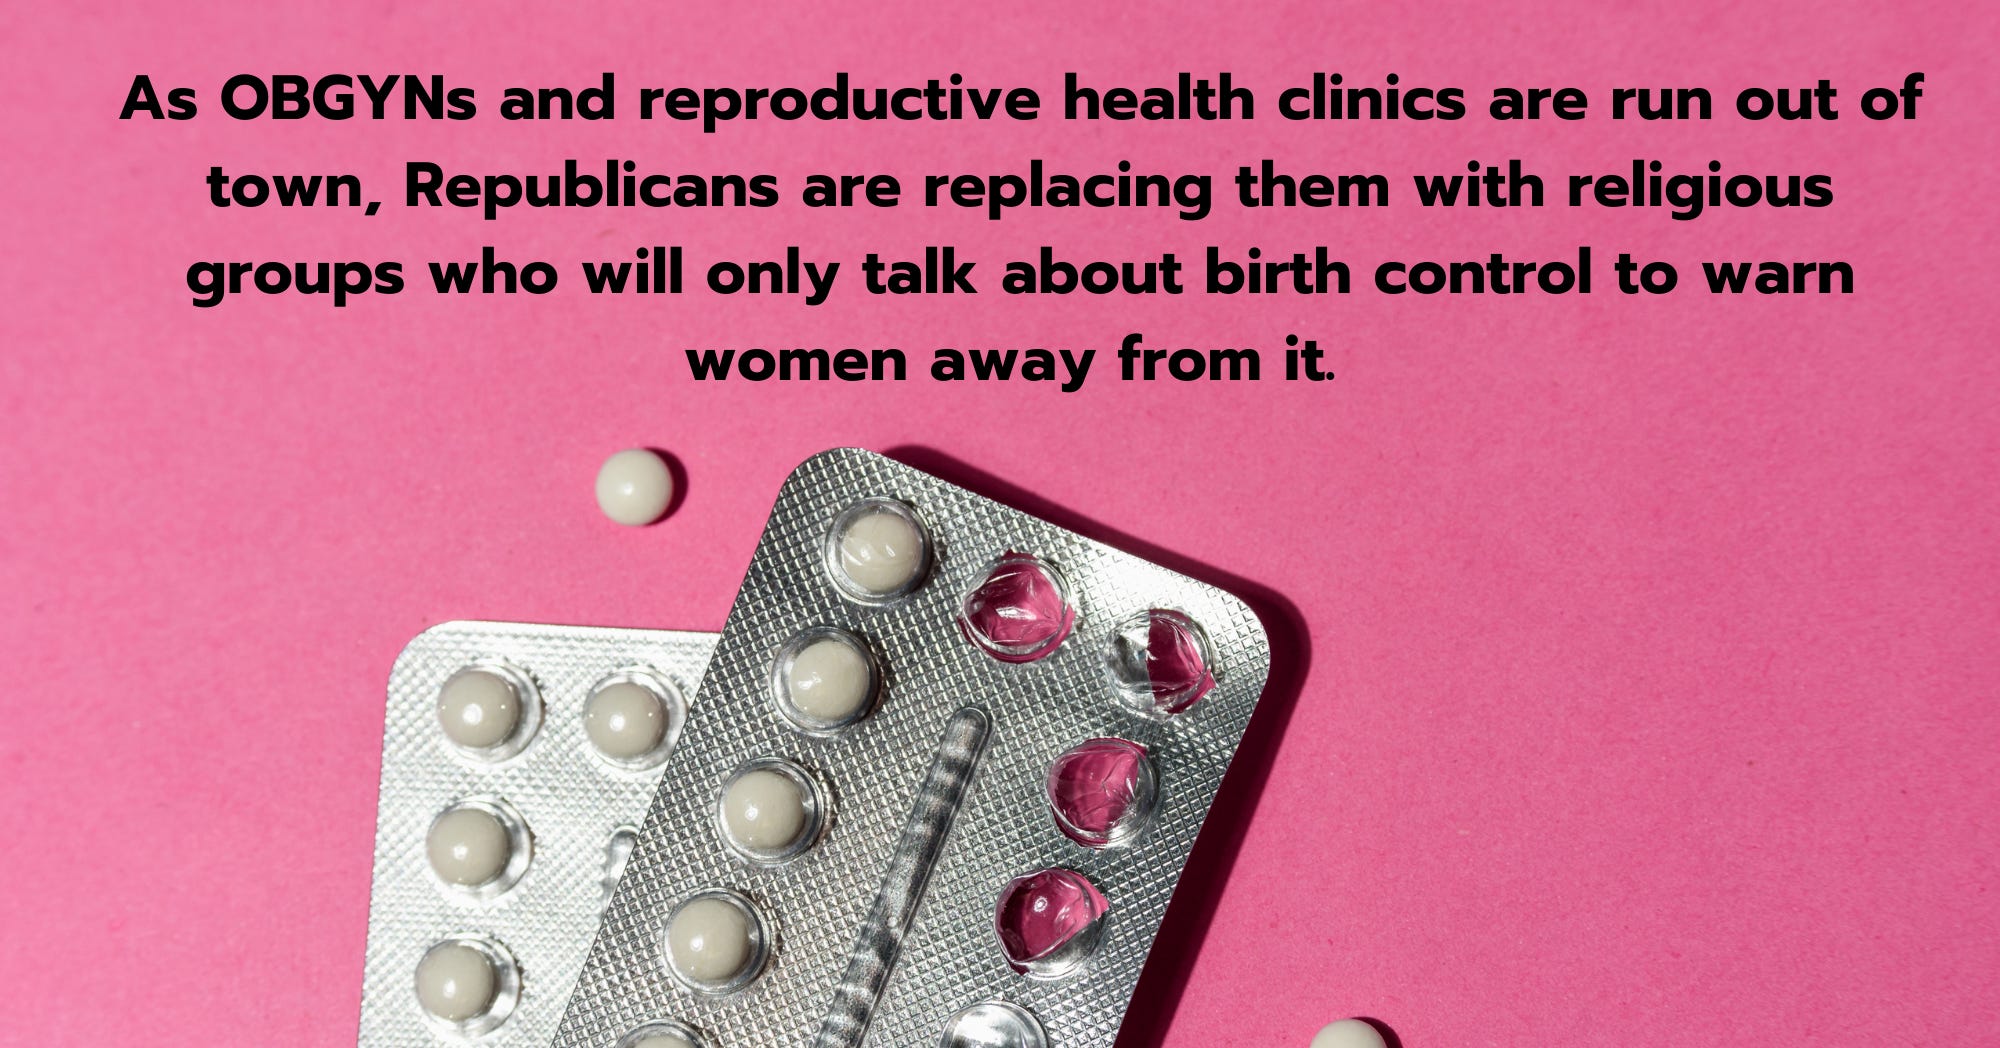 The GOP's Plan to Ban Birth Control (Part II)